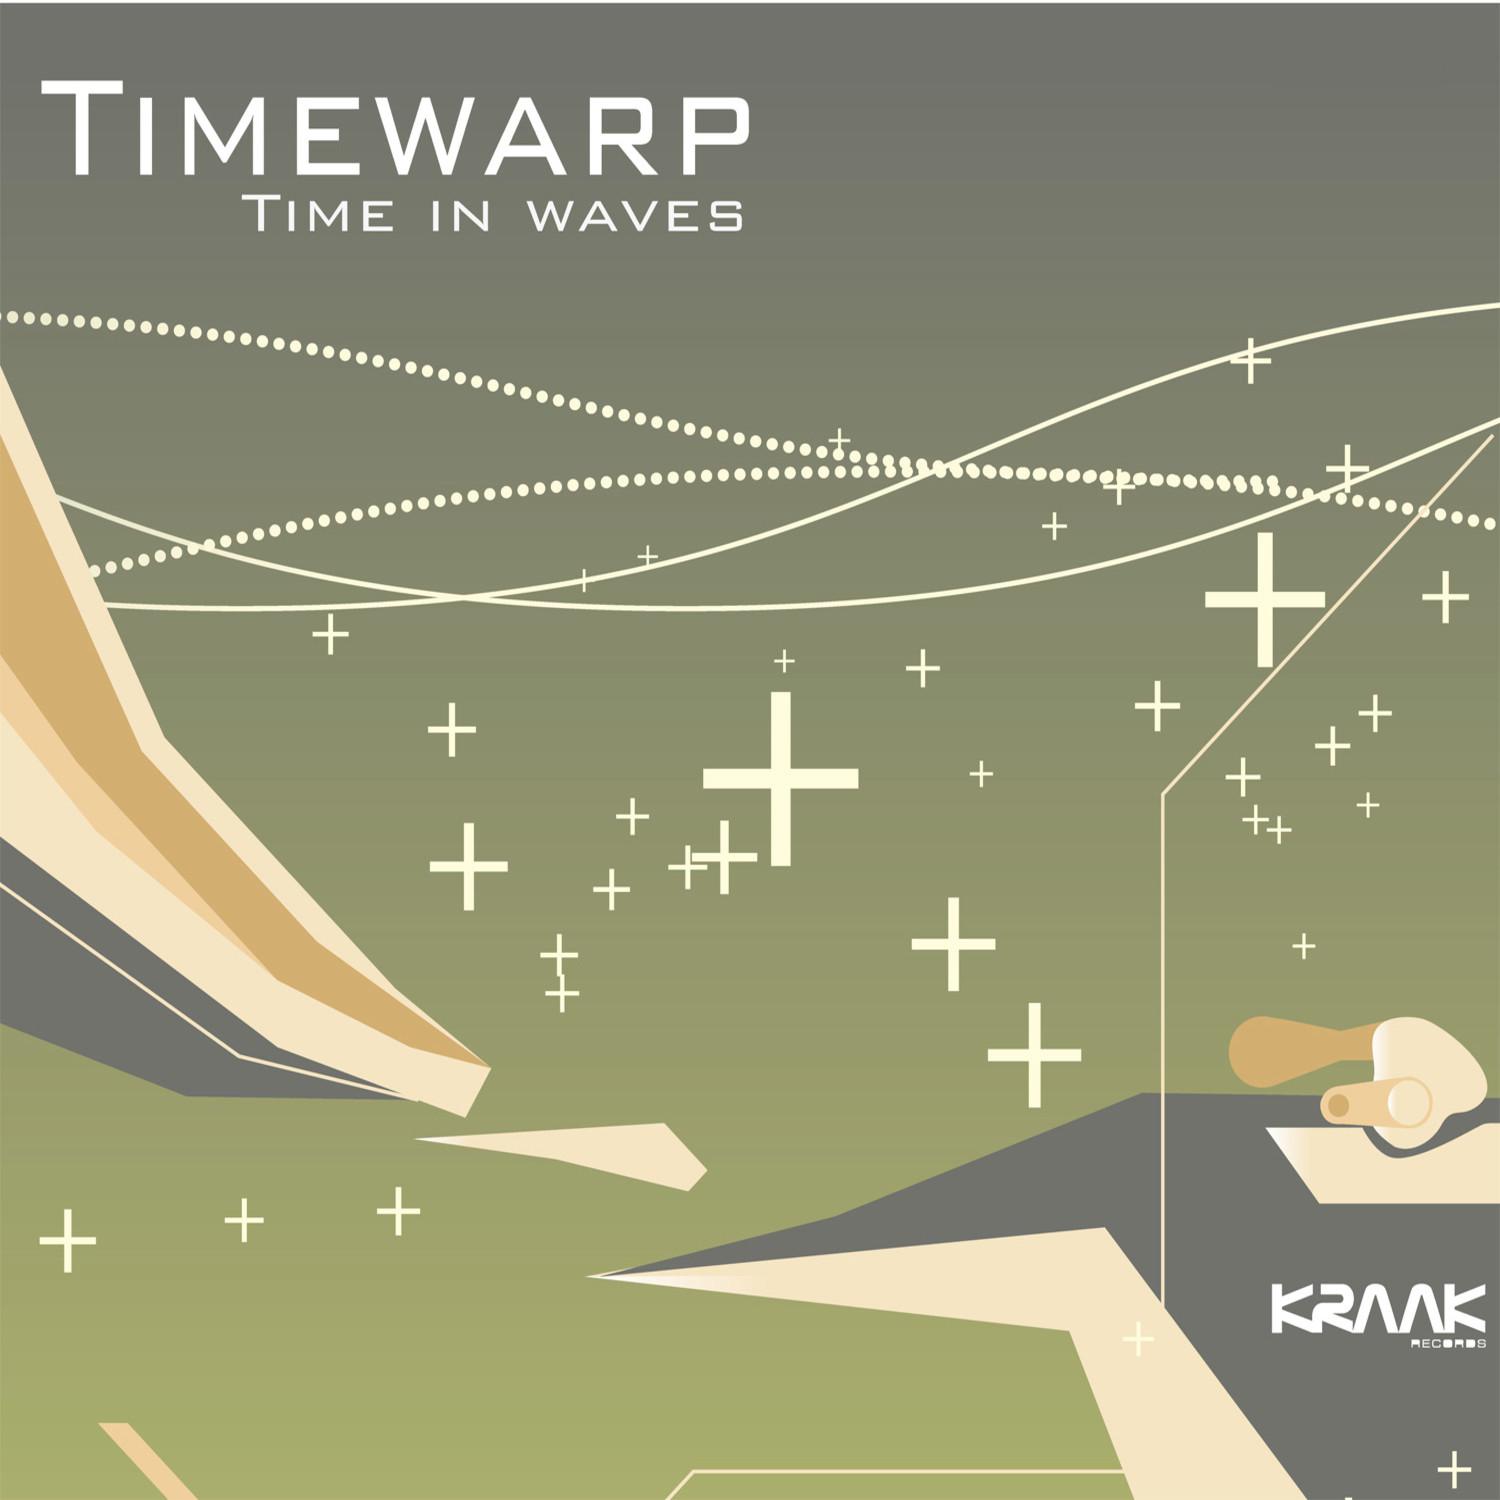 Time in waves